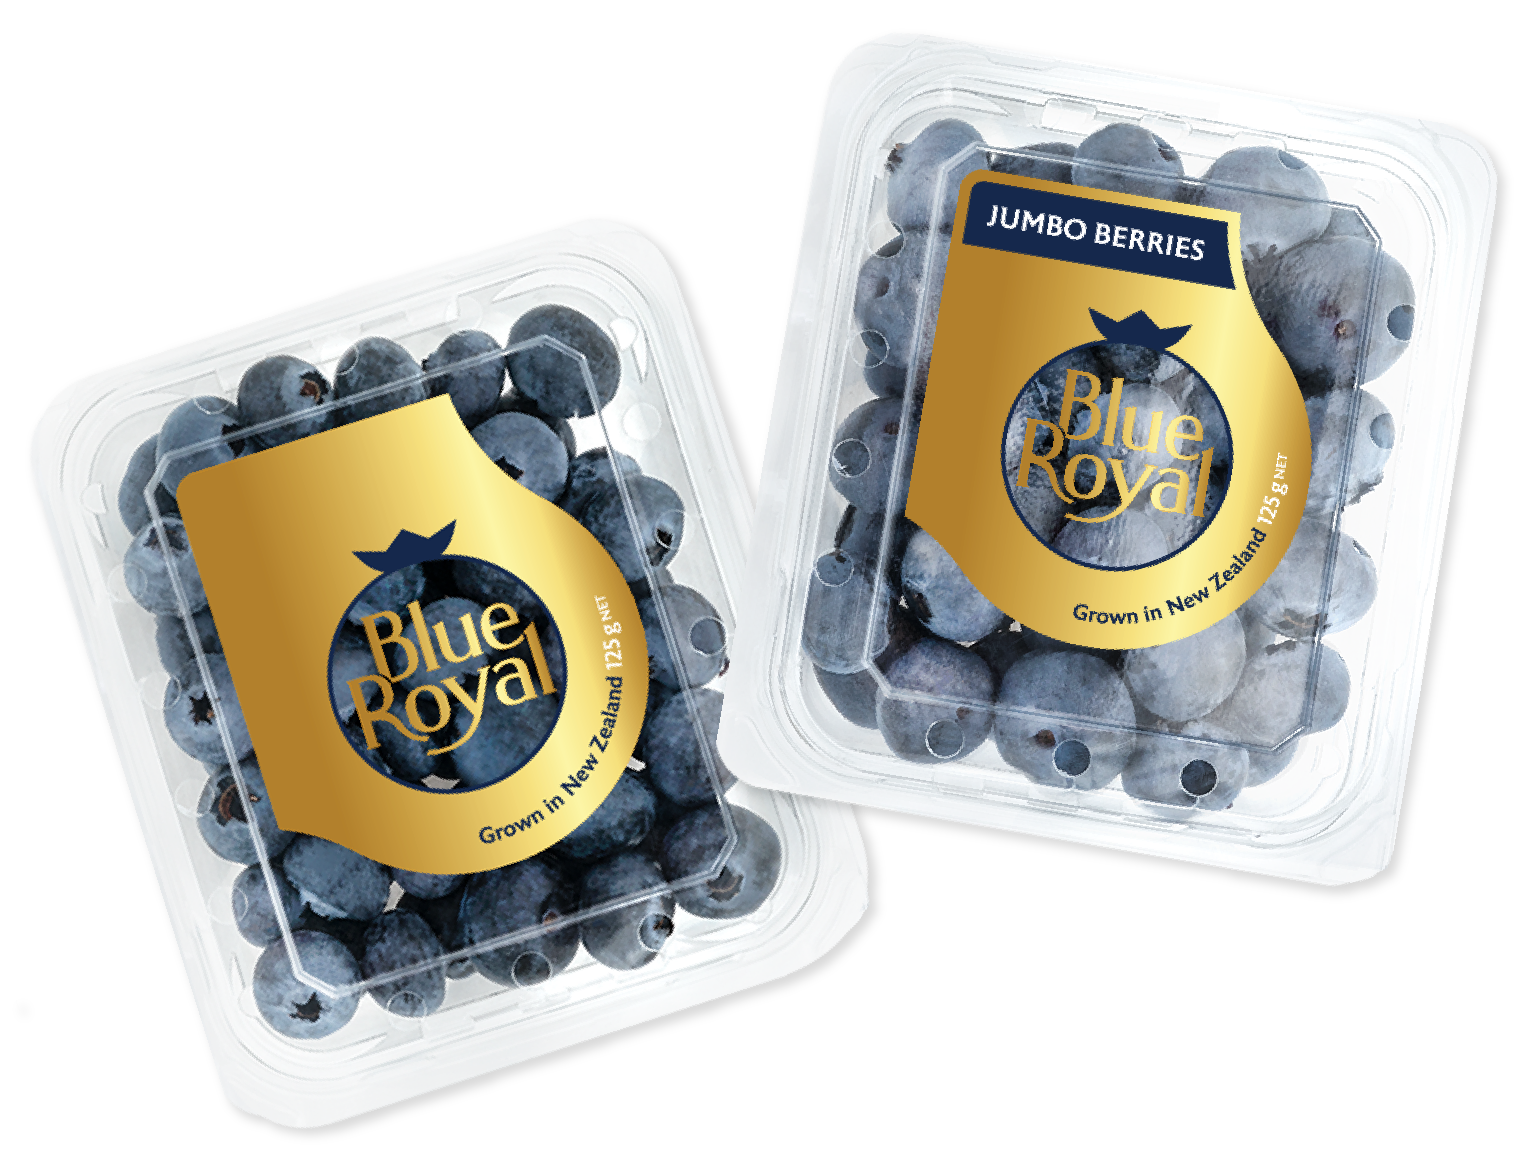 Our berries – Blue Royal